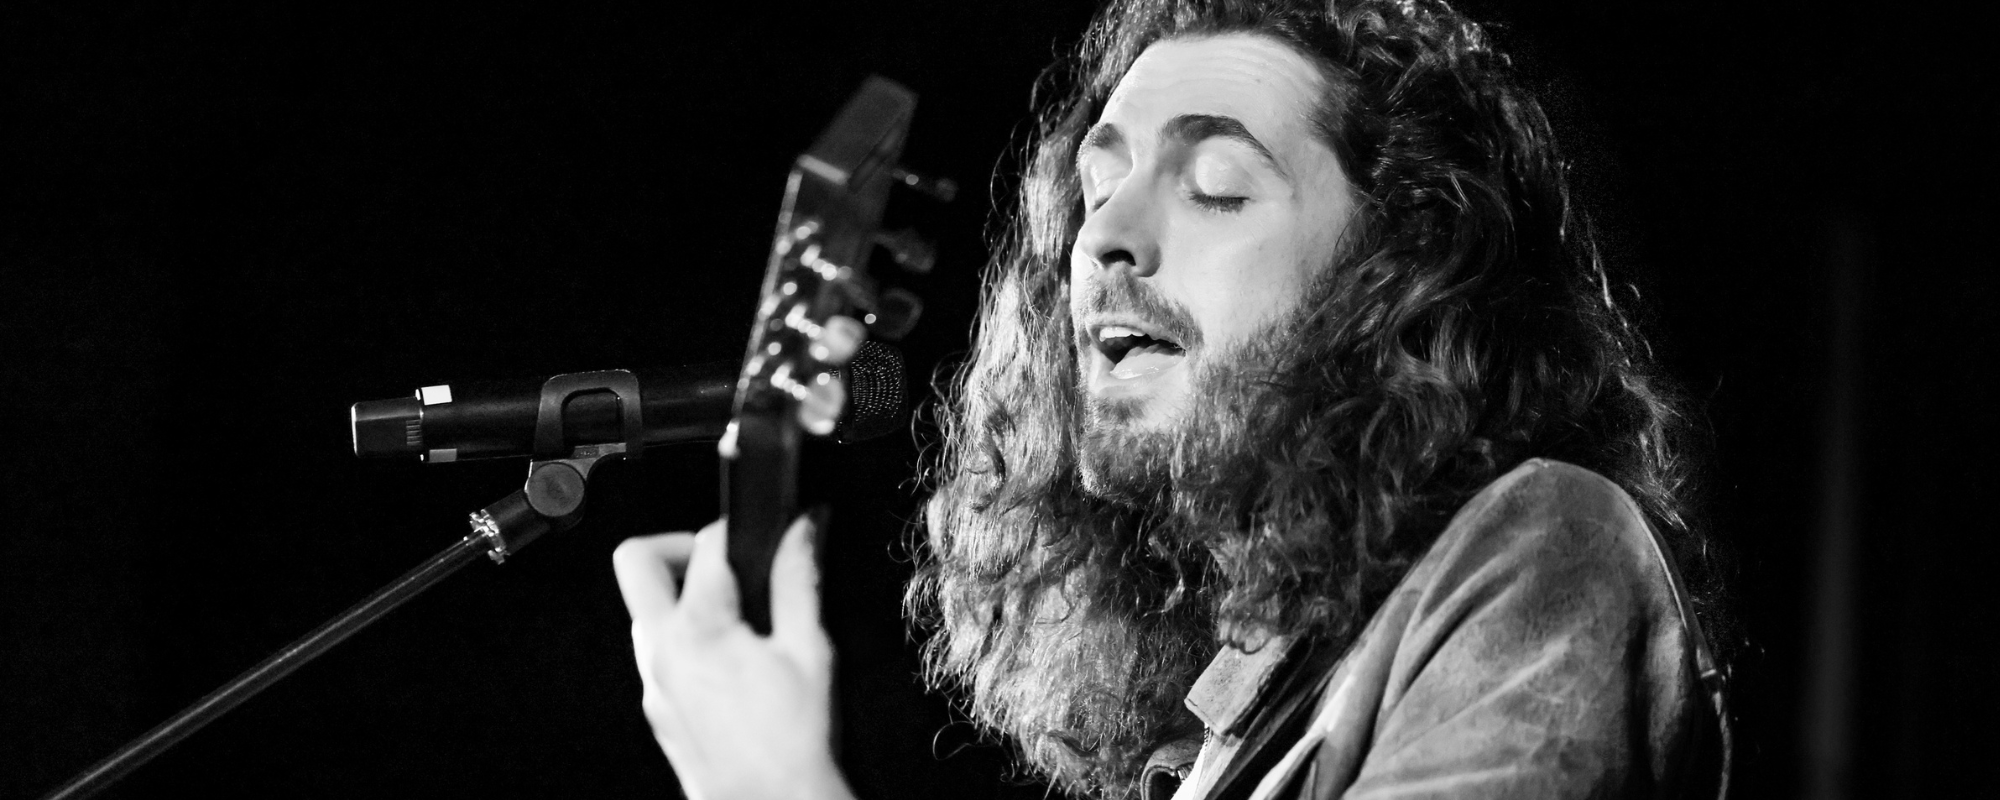 Hozier Adds New Dates to His The Unreal Unearth Tour